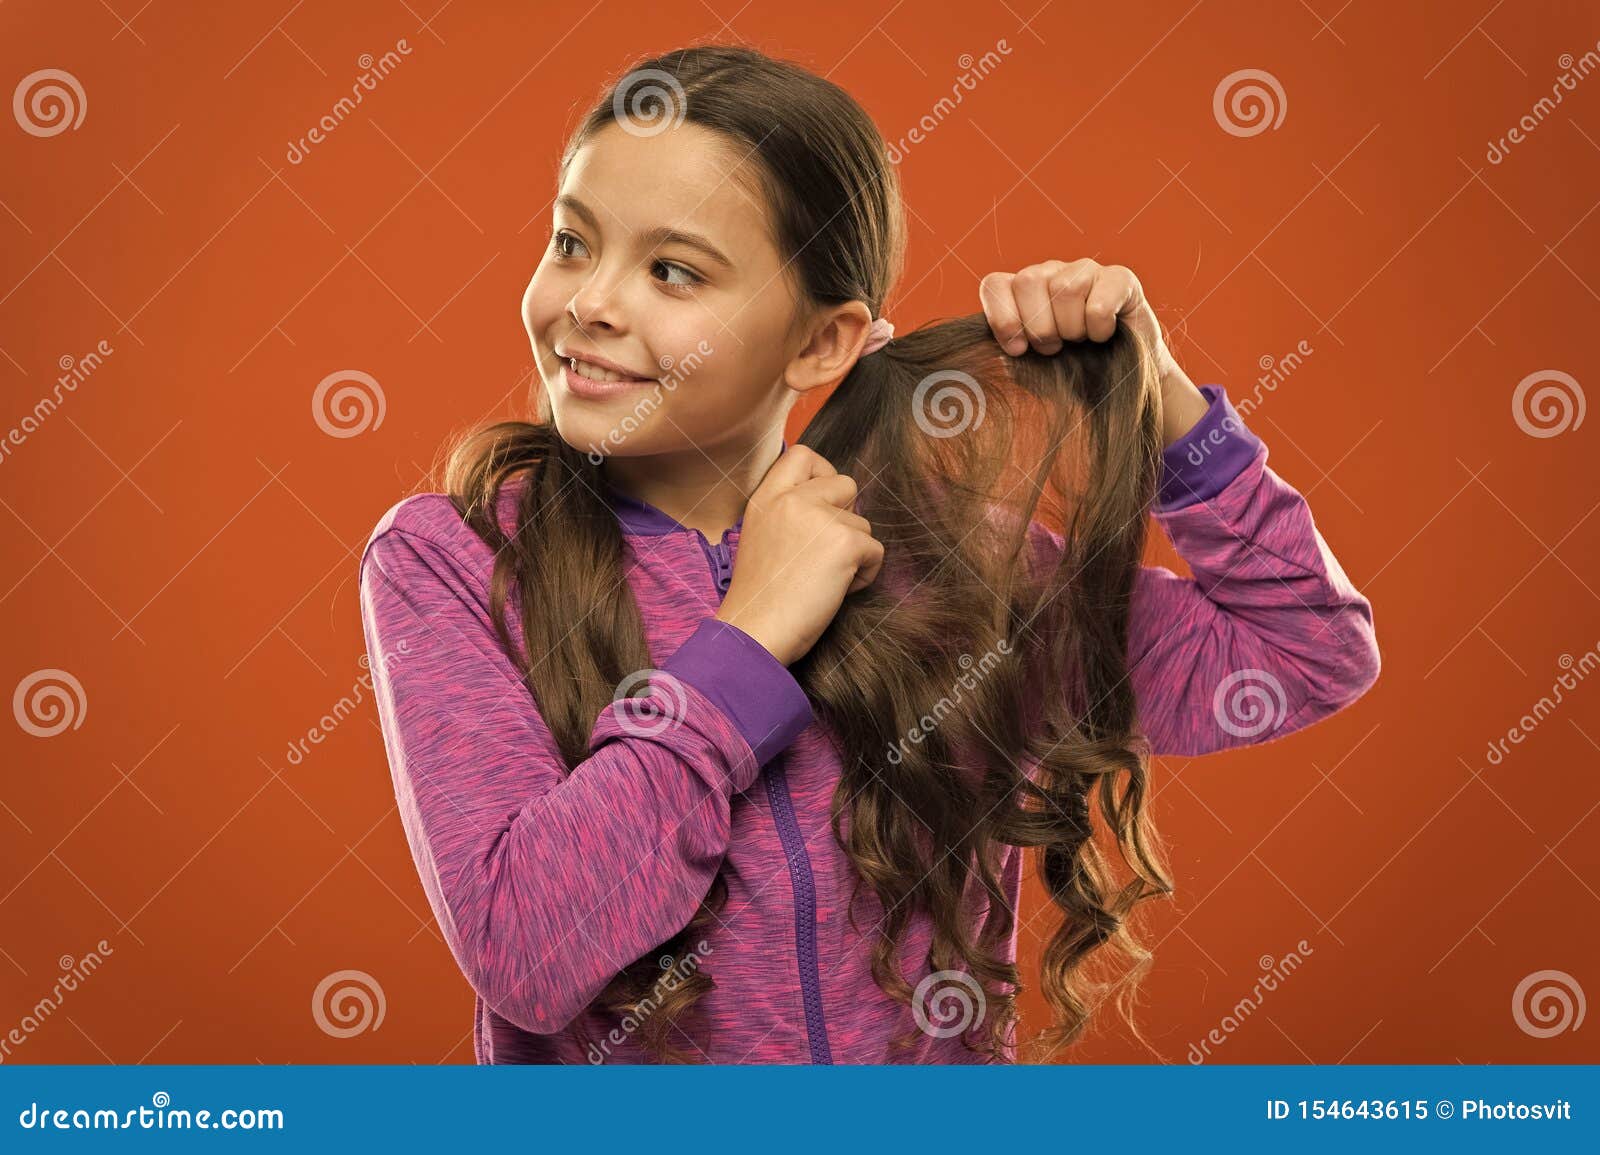 Charming Beauty. Girl Active Kid with Long Gorgeous Hair. Strong and  Healthy Hair Concept. How To Treat Curly Hair Stock Image - Image of making,  child: 154643615